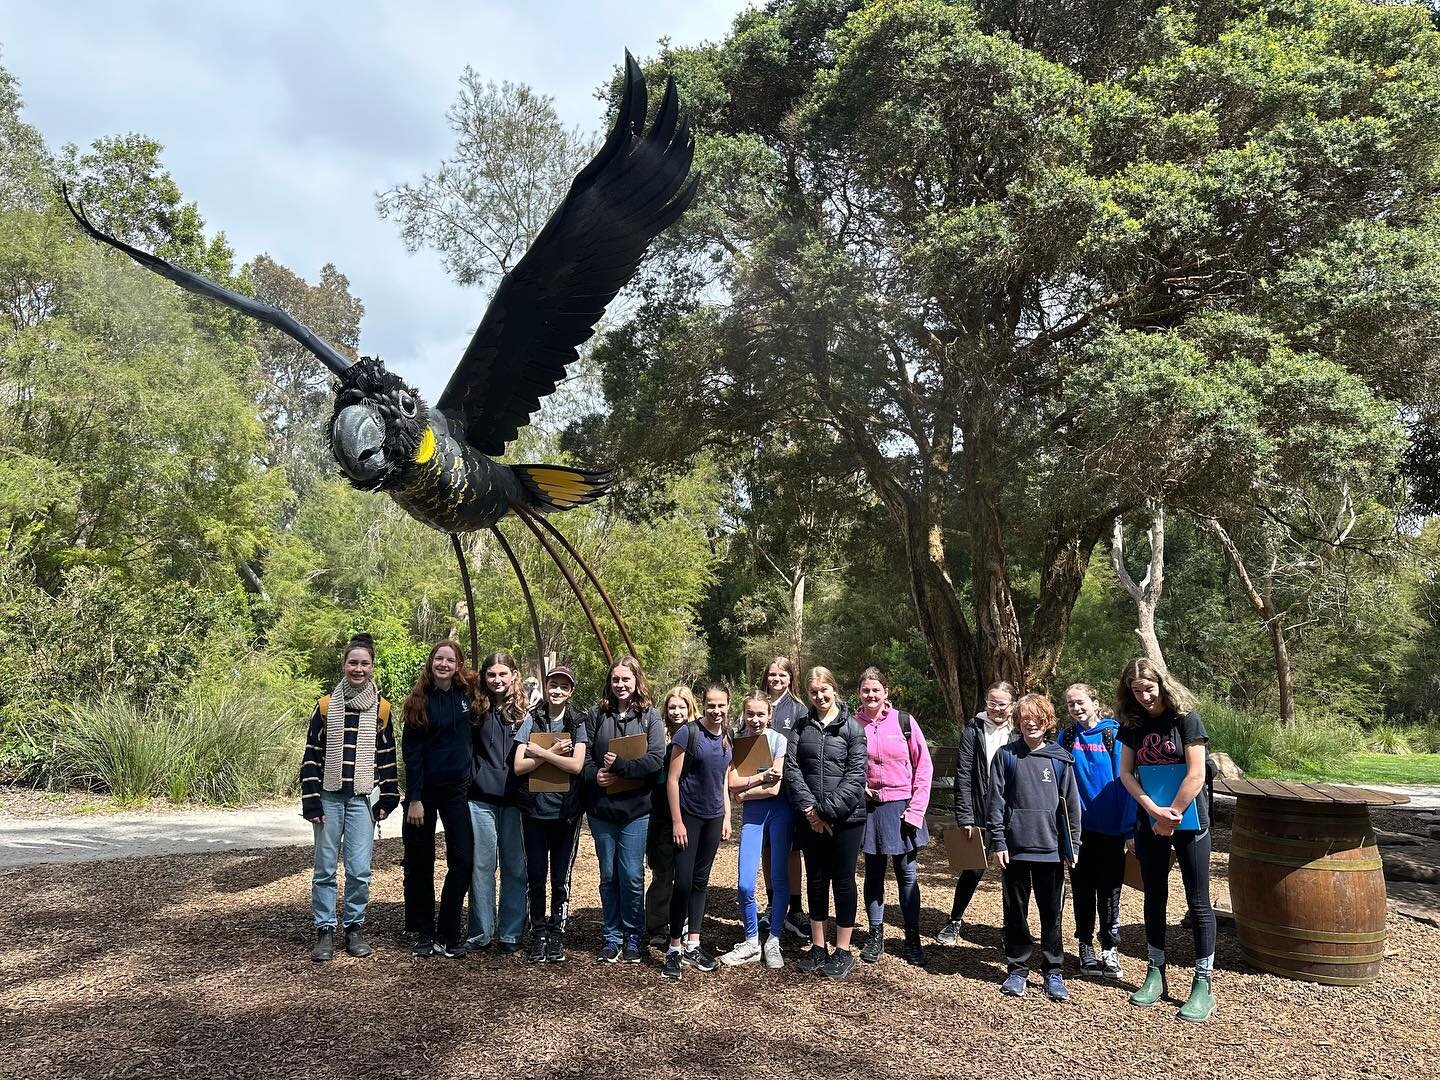 Term 4 has been so exciting! Earlier this term a team of 20 students embarked on a study tour of @zoosvictoria Healesville Sanctuary. The amazing staff at Healesville heard about our Aviary for Life and were willing to help answer all of the curly qu